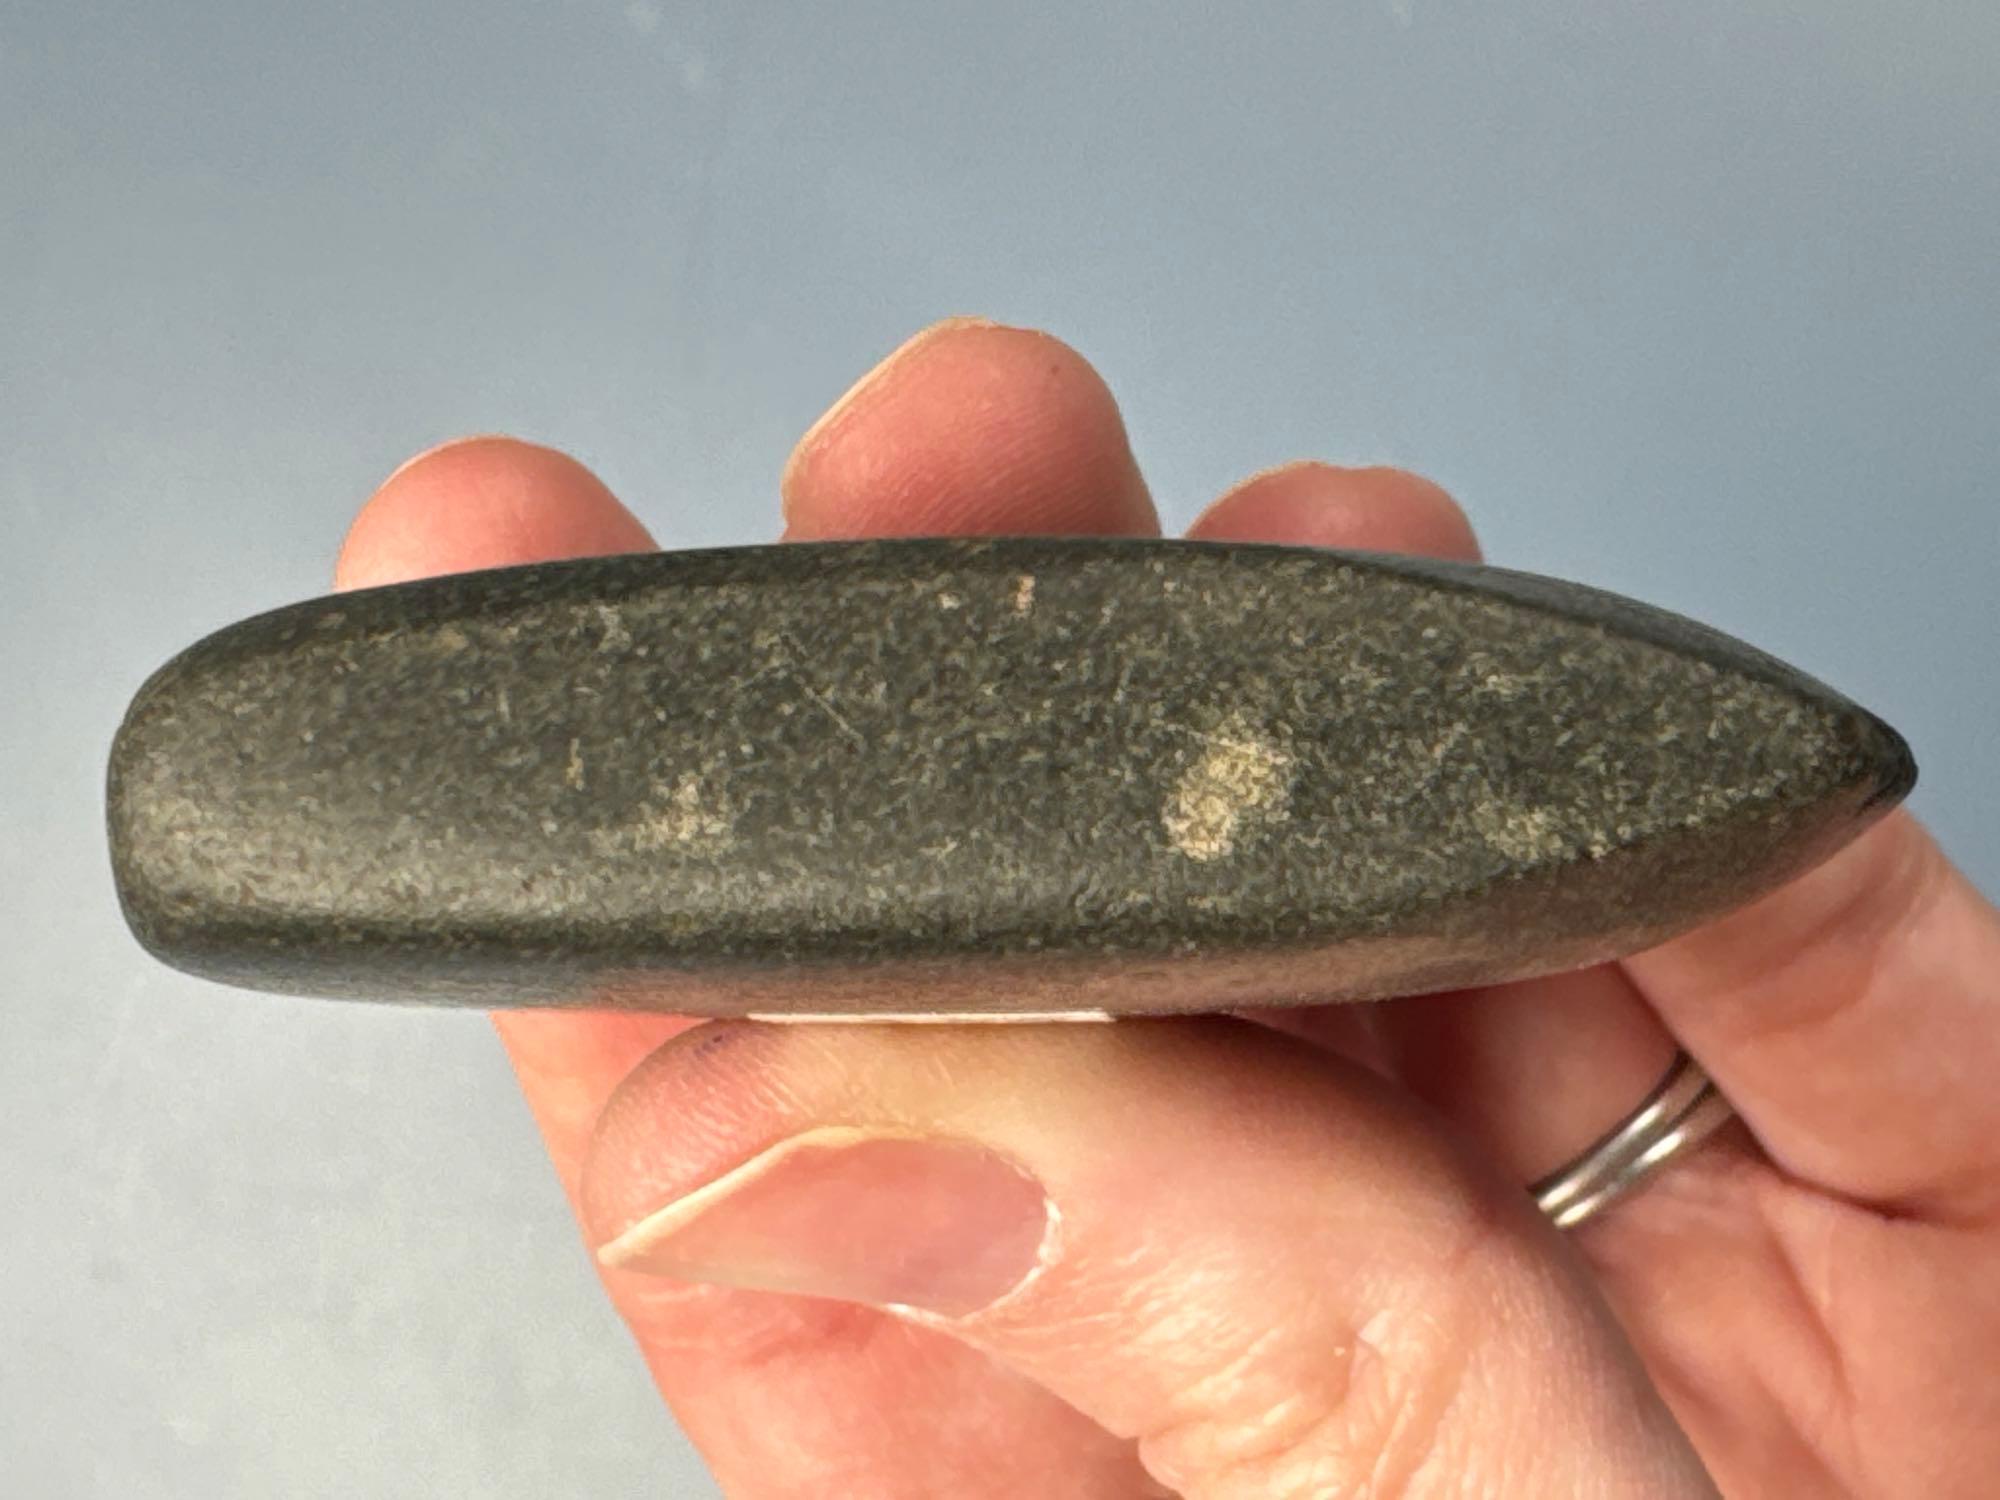 FINE 2 1/16" Miniature Celt, Highly Polished, Found in Ohio, Purchased from Dick Savige in 1998, Ex: